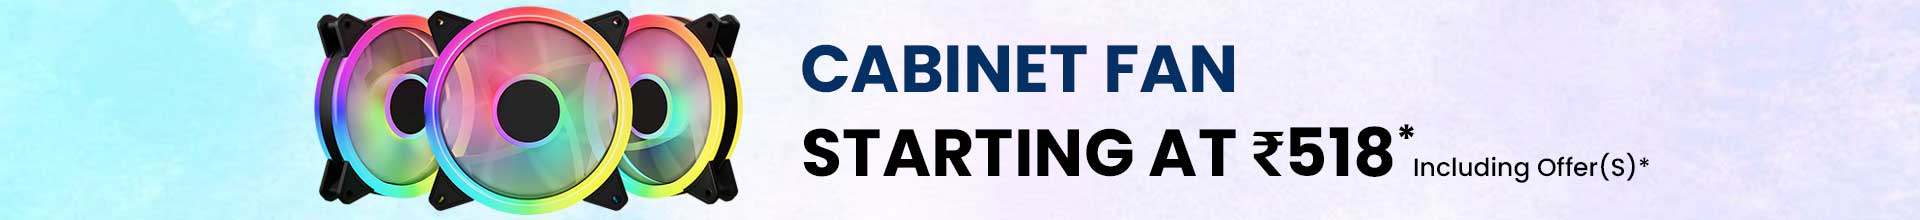 Cabinet Fan Category Page Banner